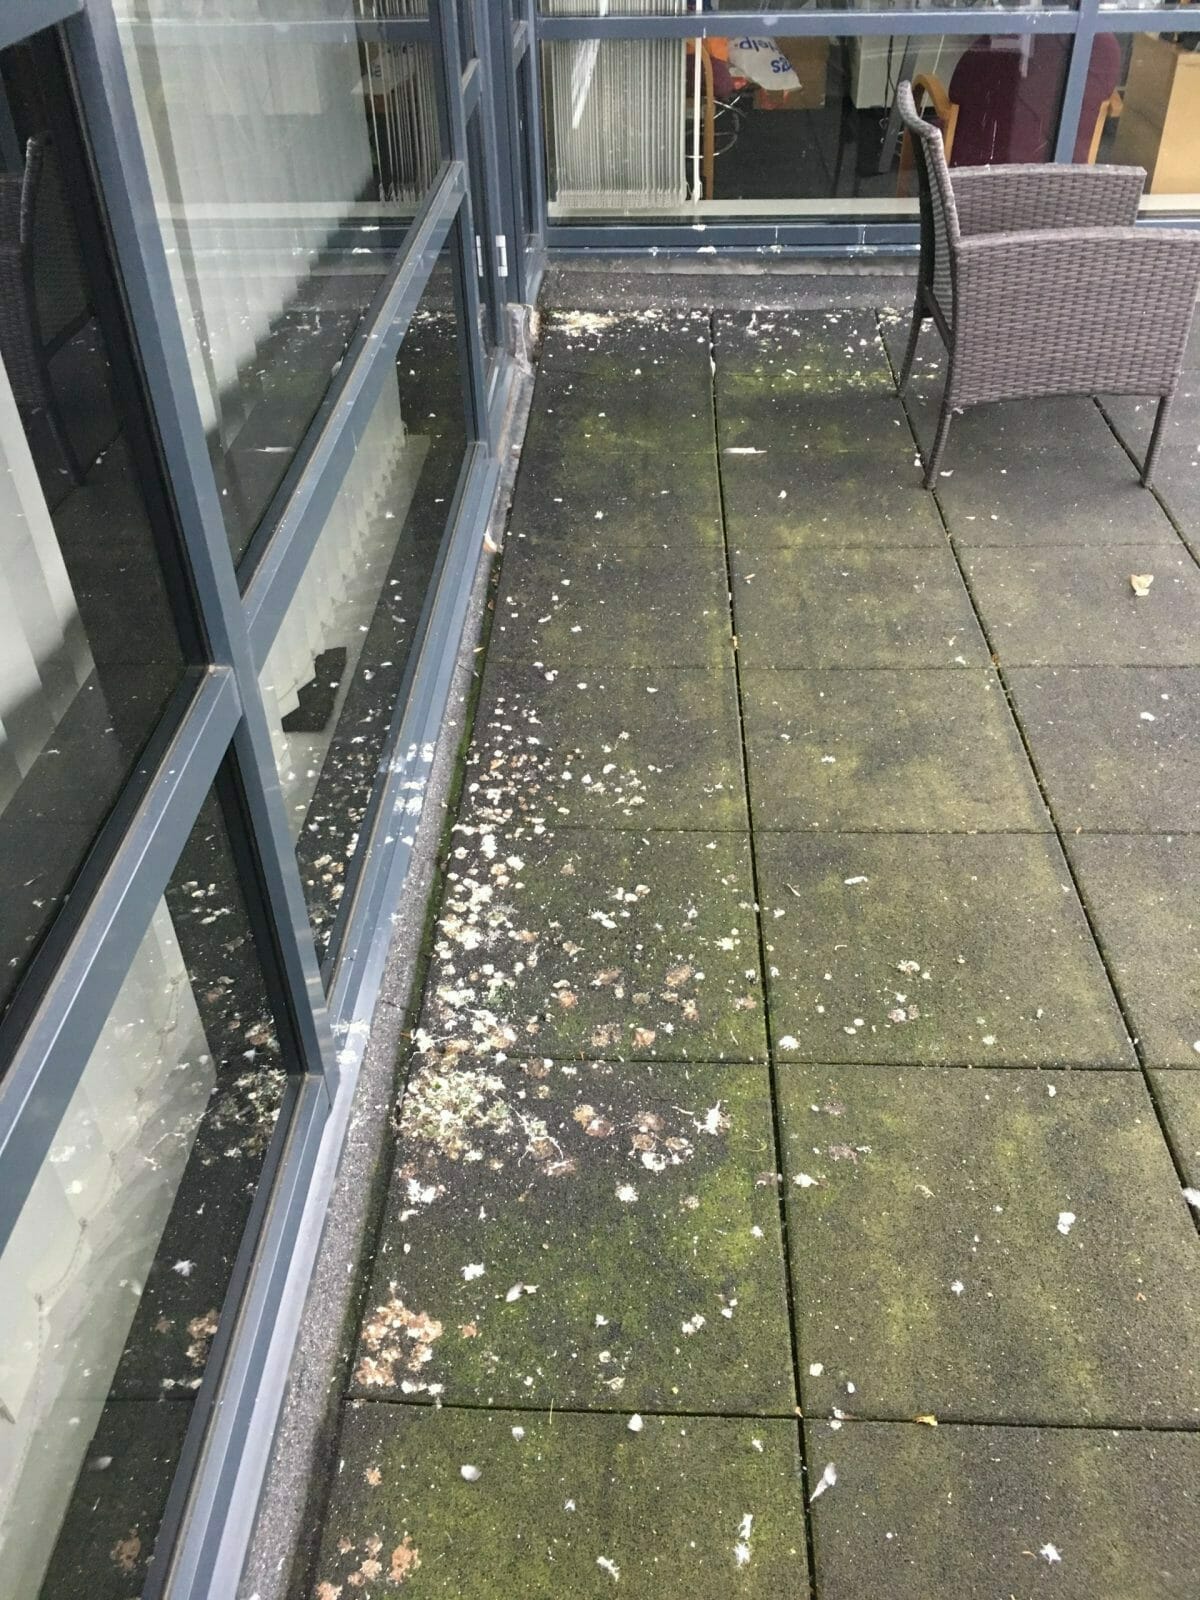 pigeon droppings on the floor of a building in maidstone, kent